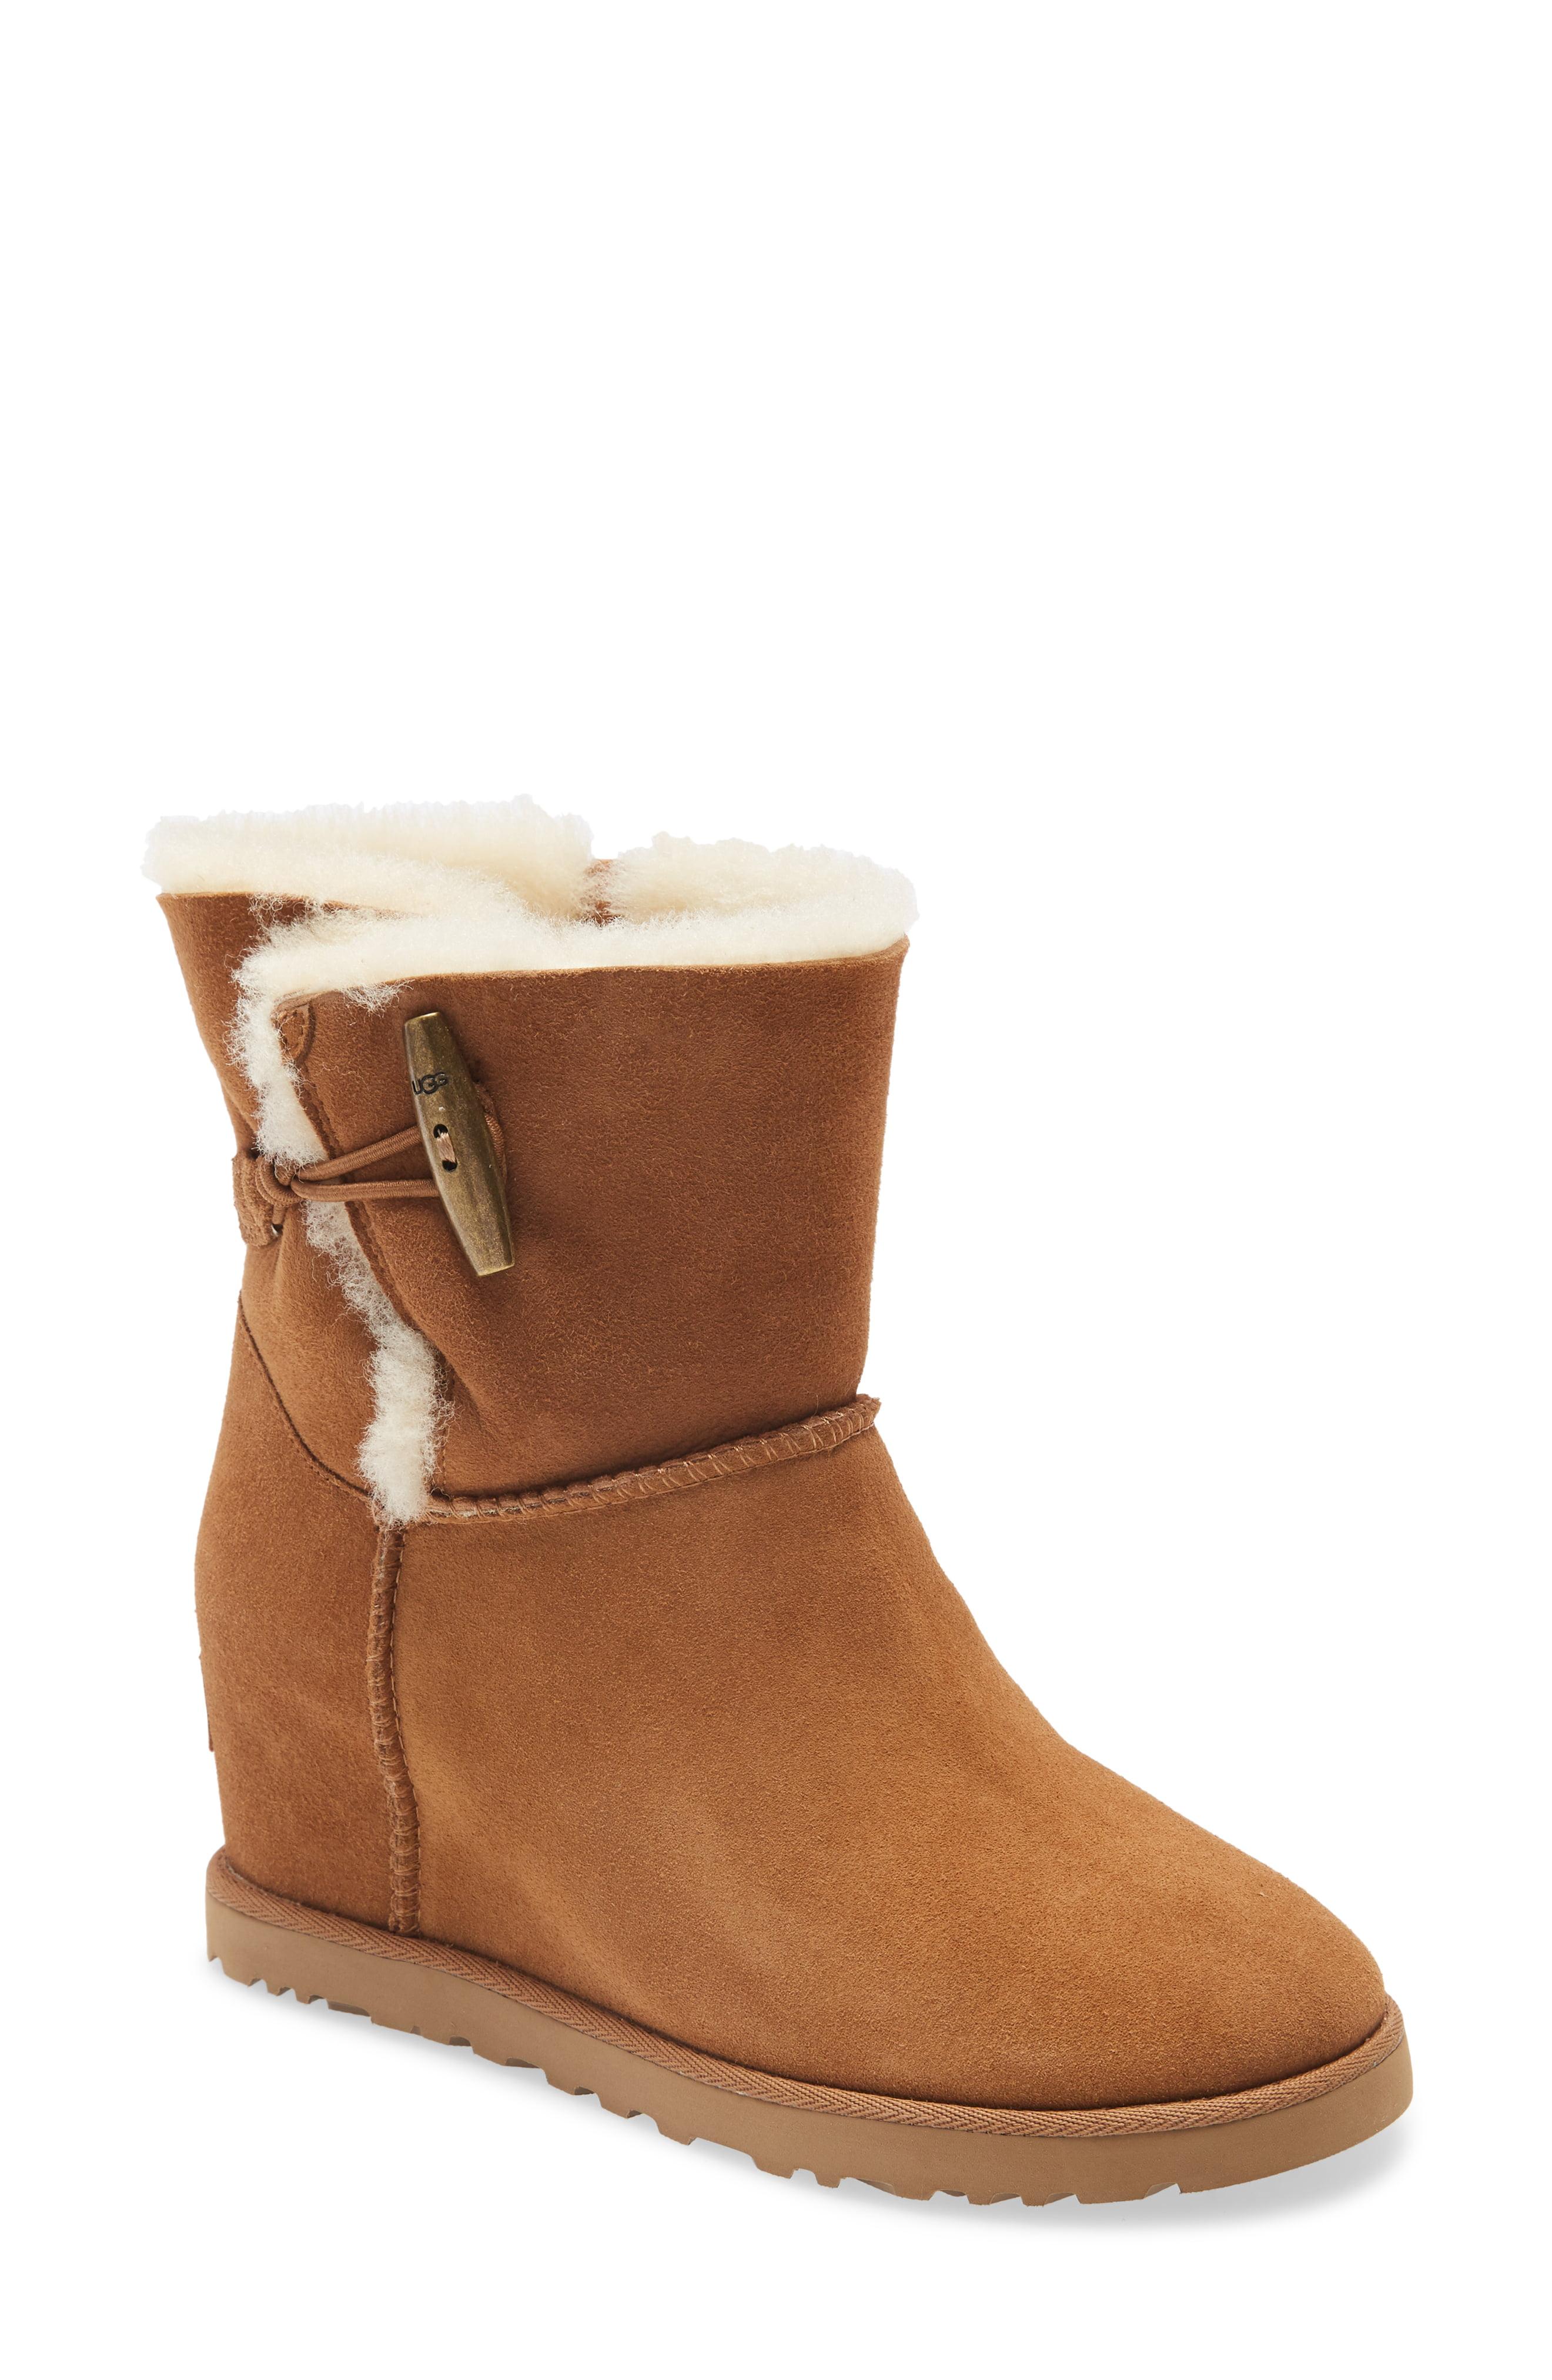 UGG Australia Wedge Boots for Women for sale